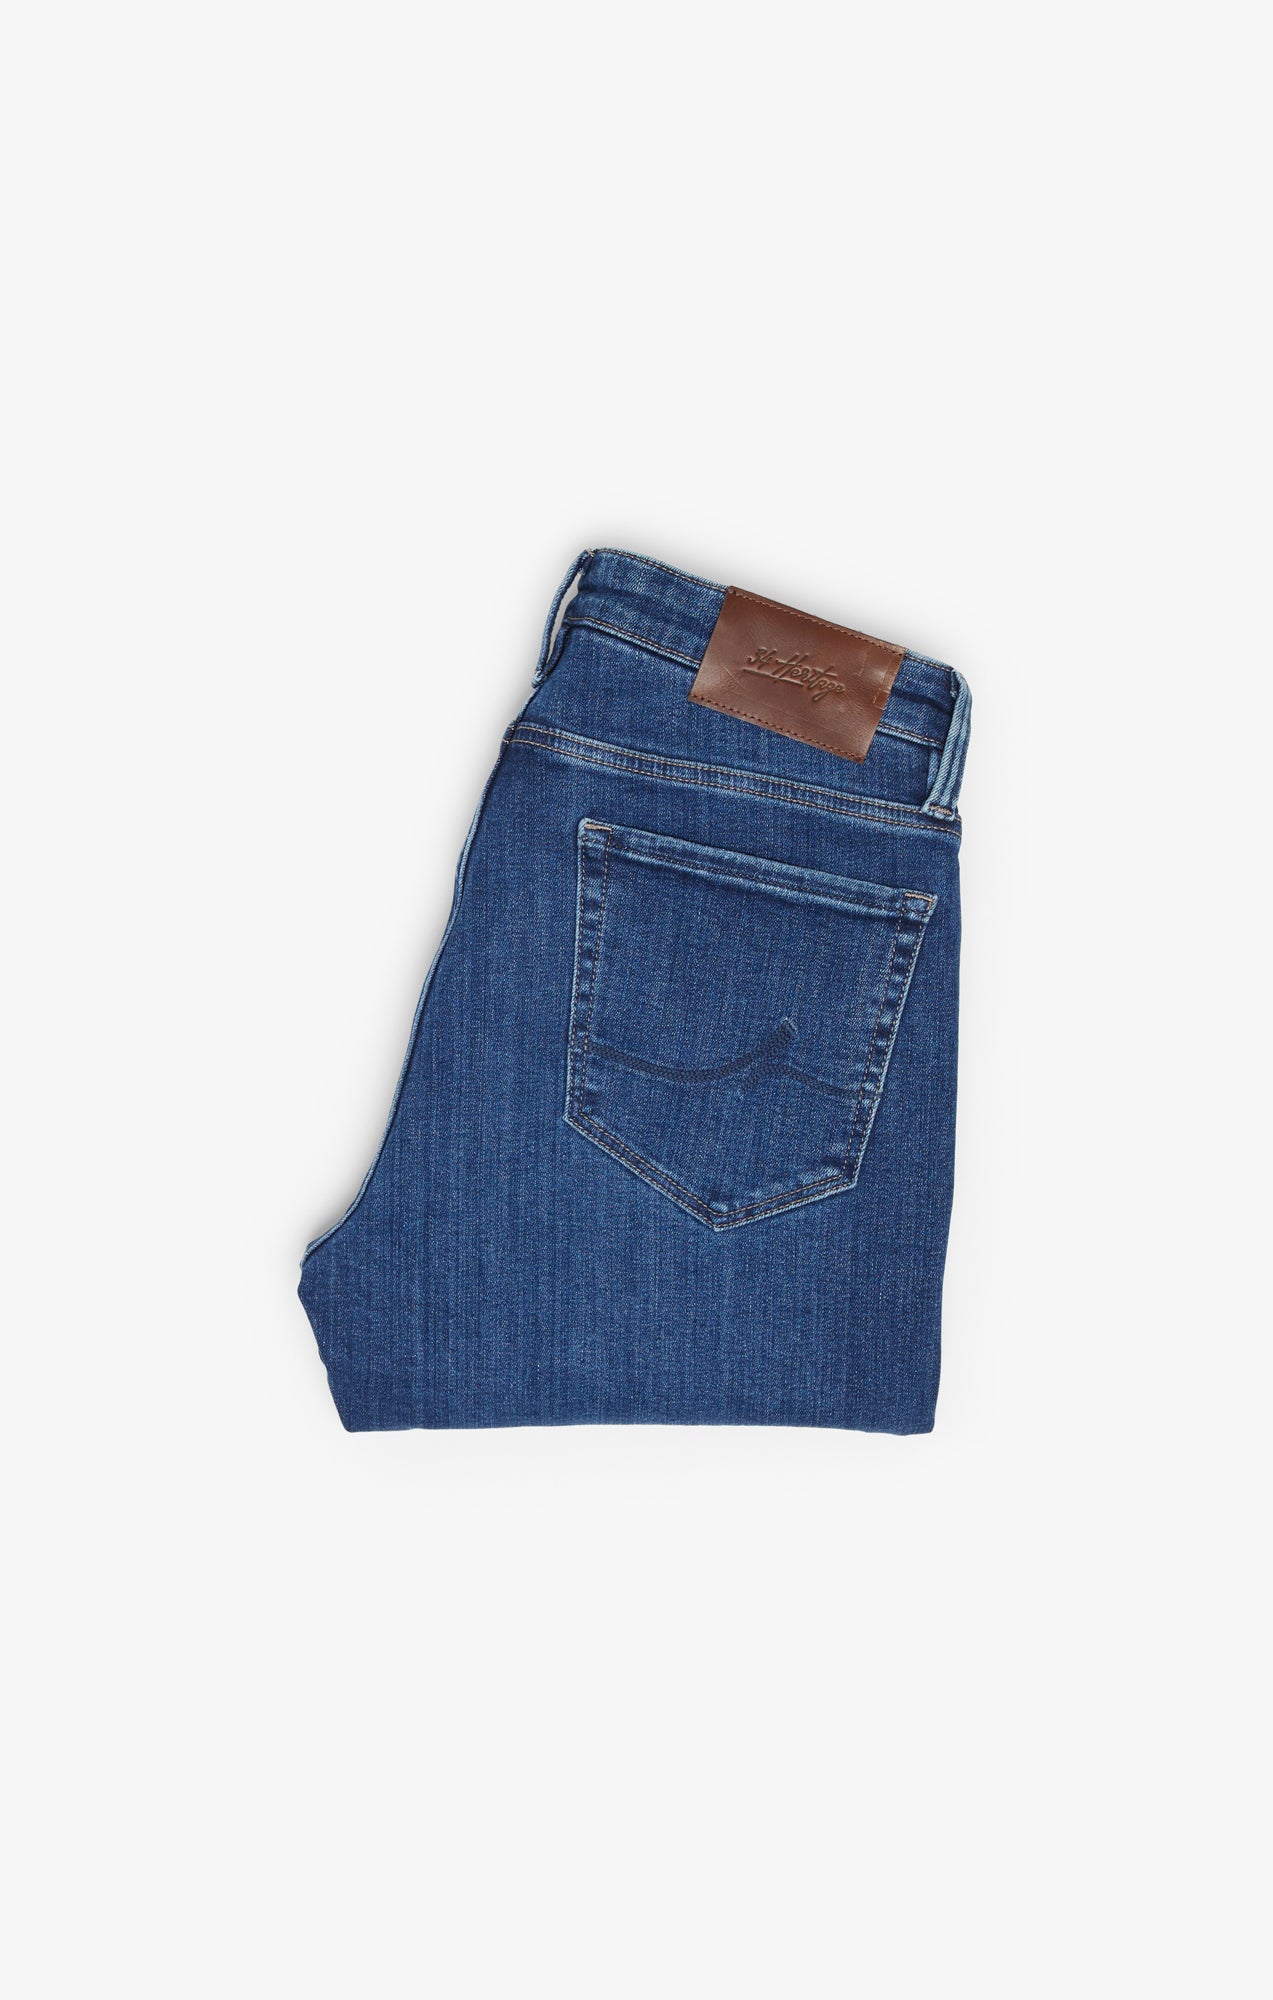 Courage Straight Leg Jeans in Deep Brushed Organic Image 9